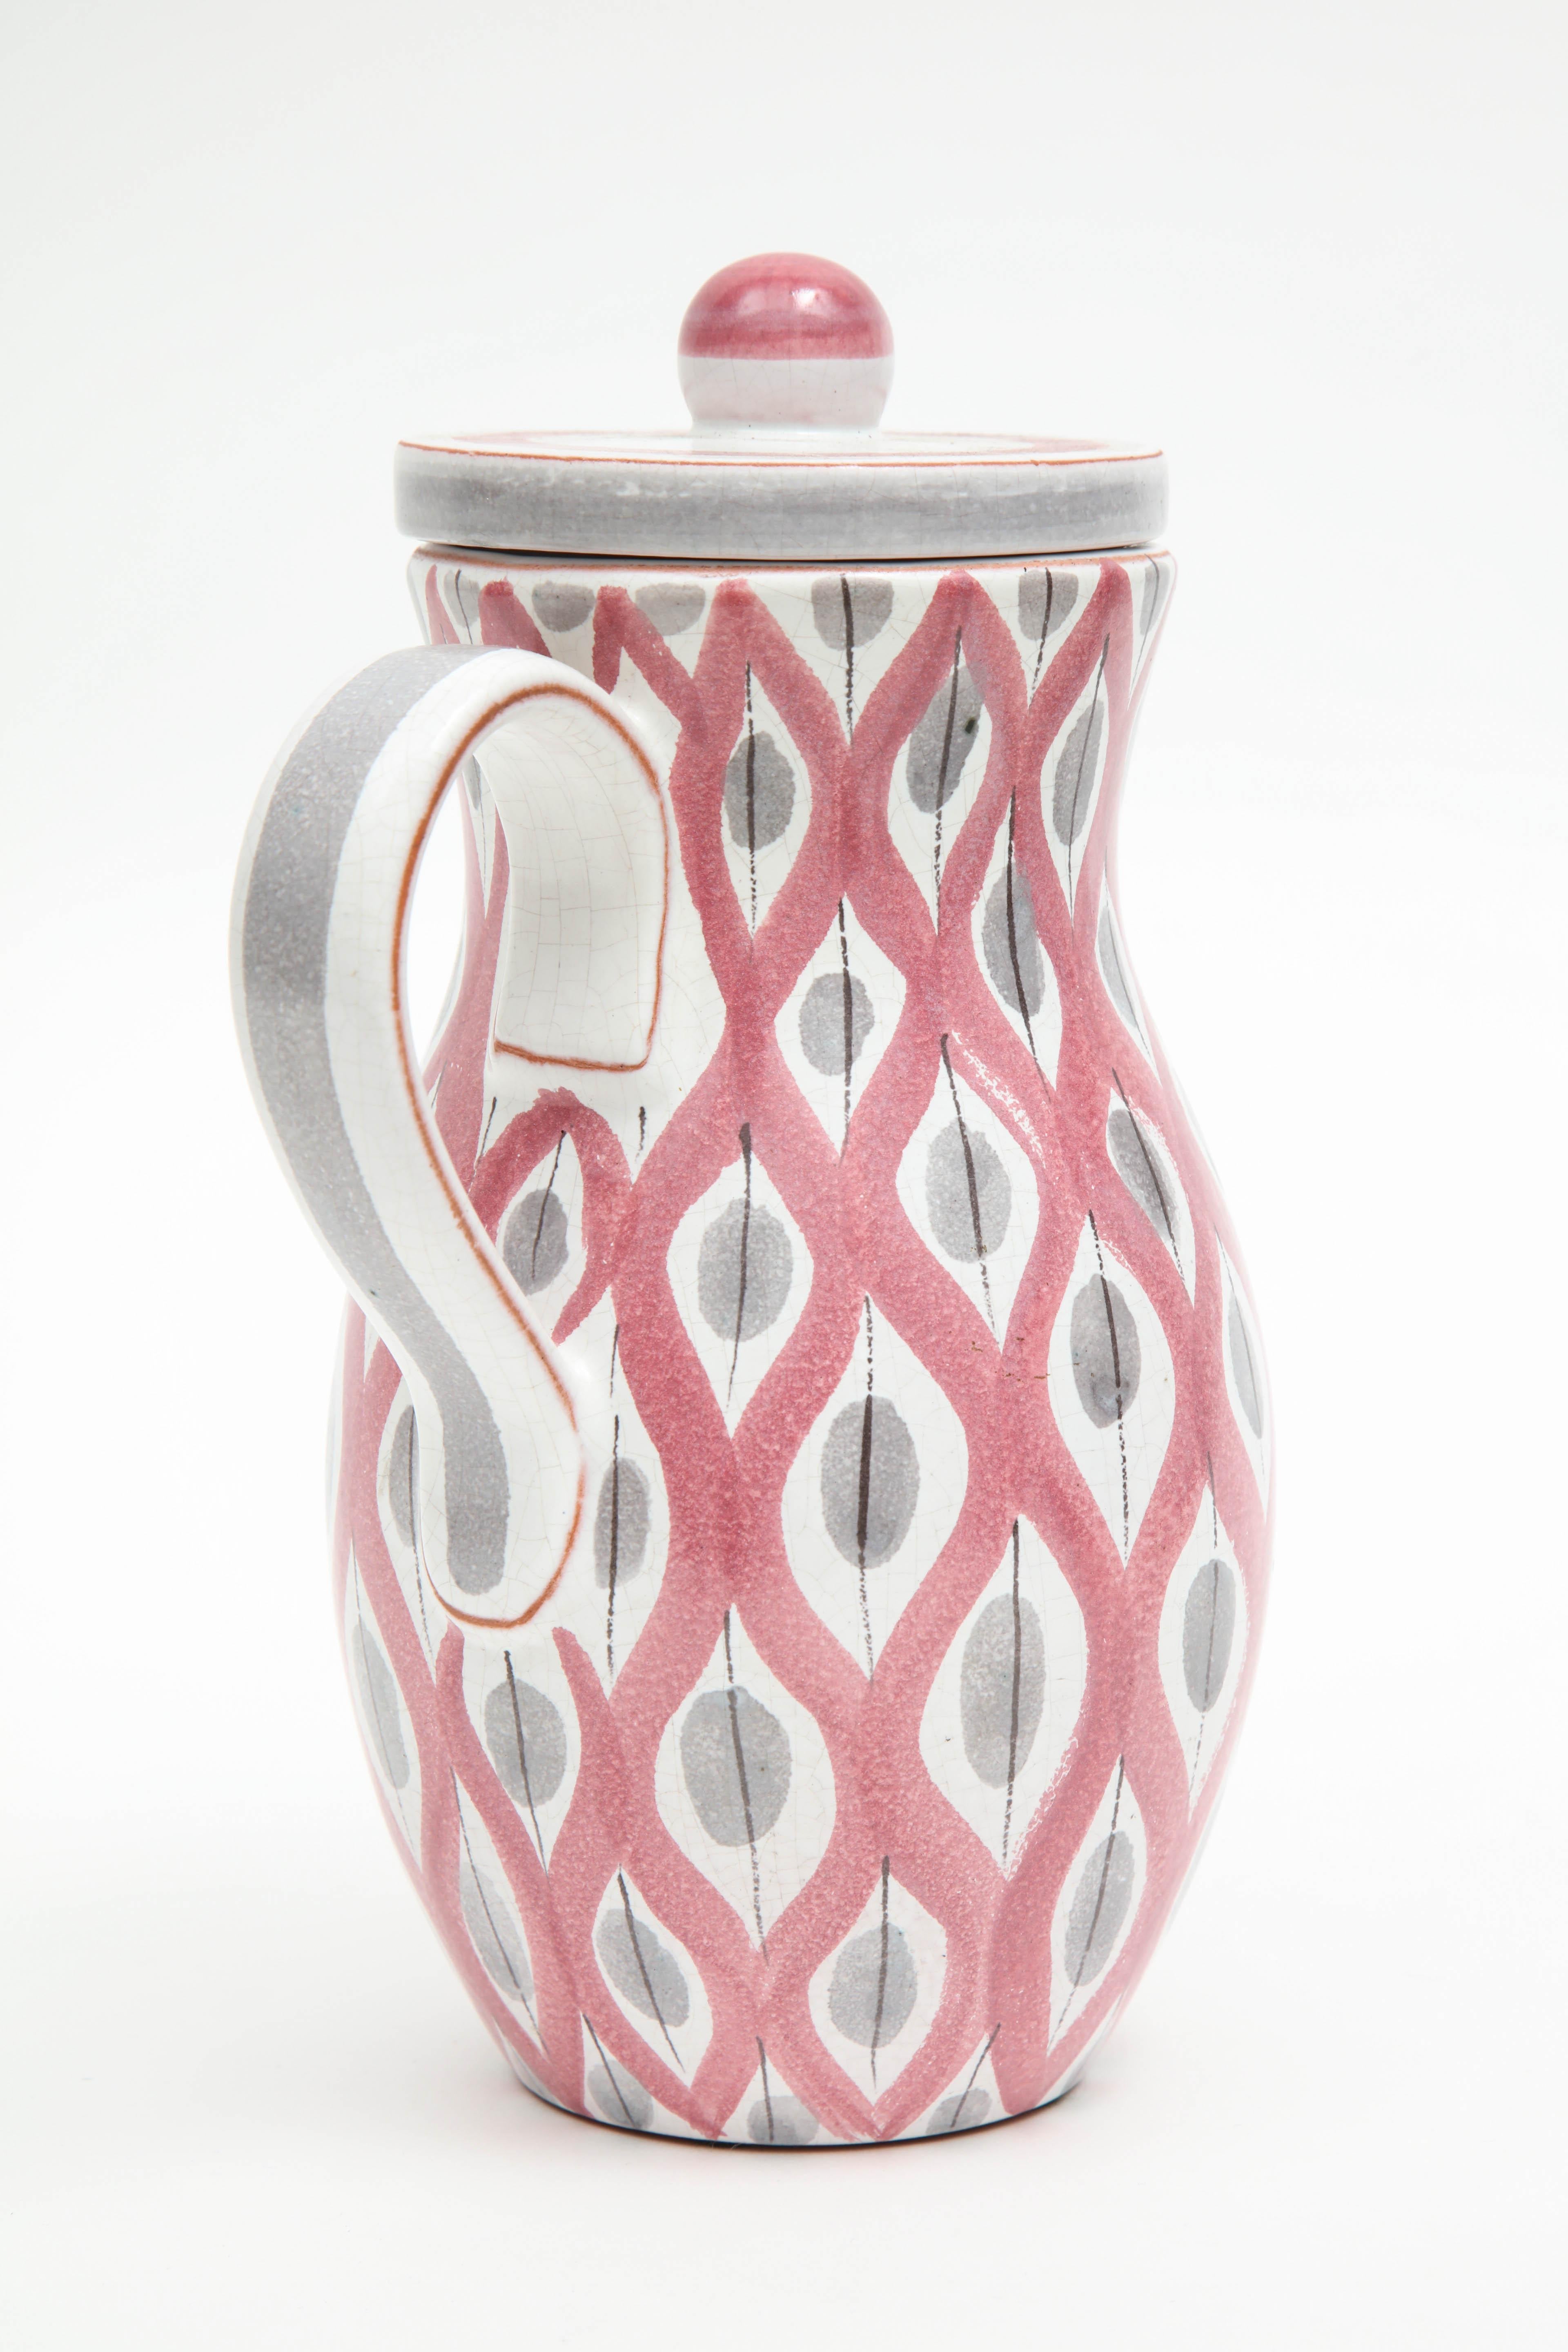 Swedish Pitcher by Stig Lindberg, Scandinavian, Midcentury, Red, Gray and White, C 1950 For Sale